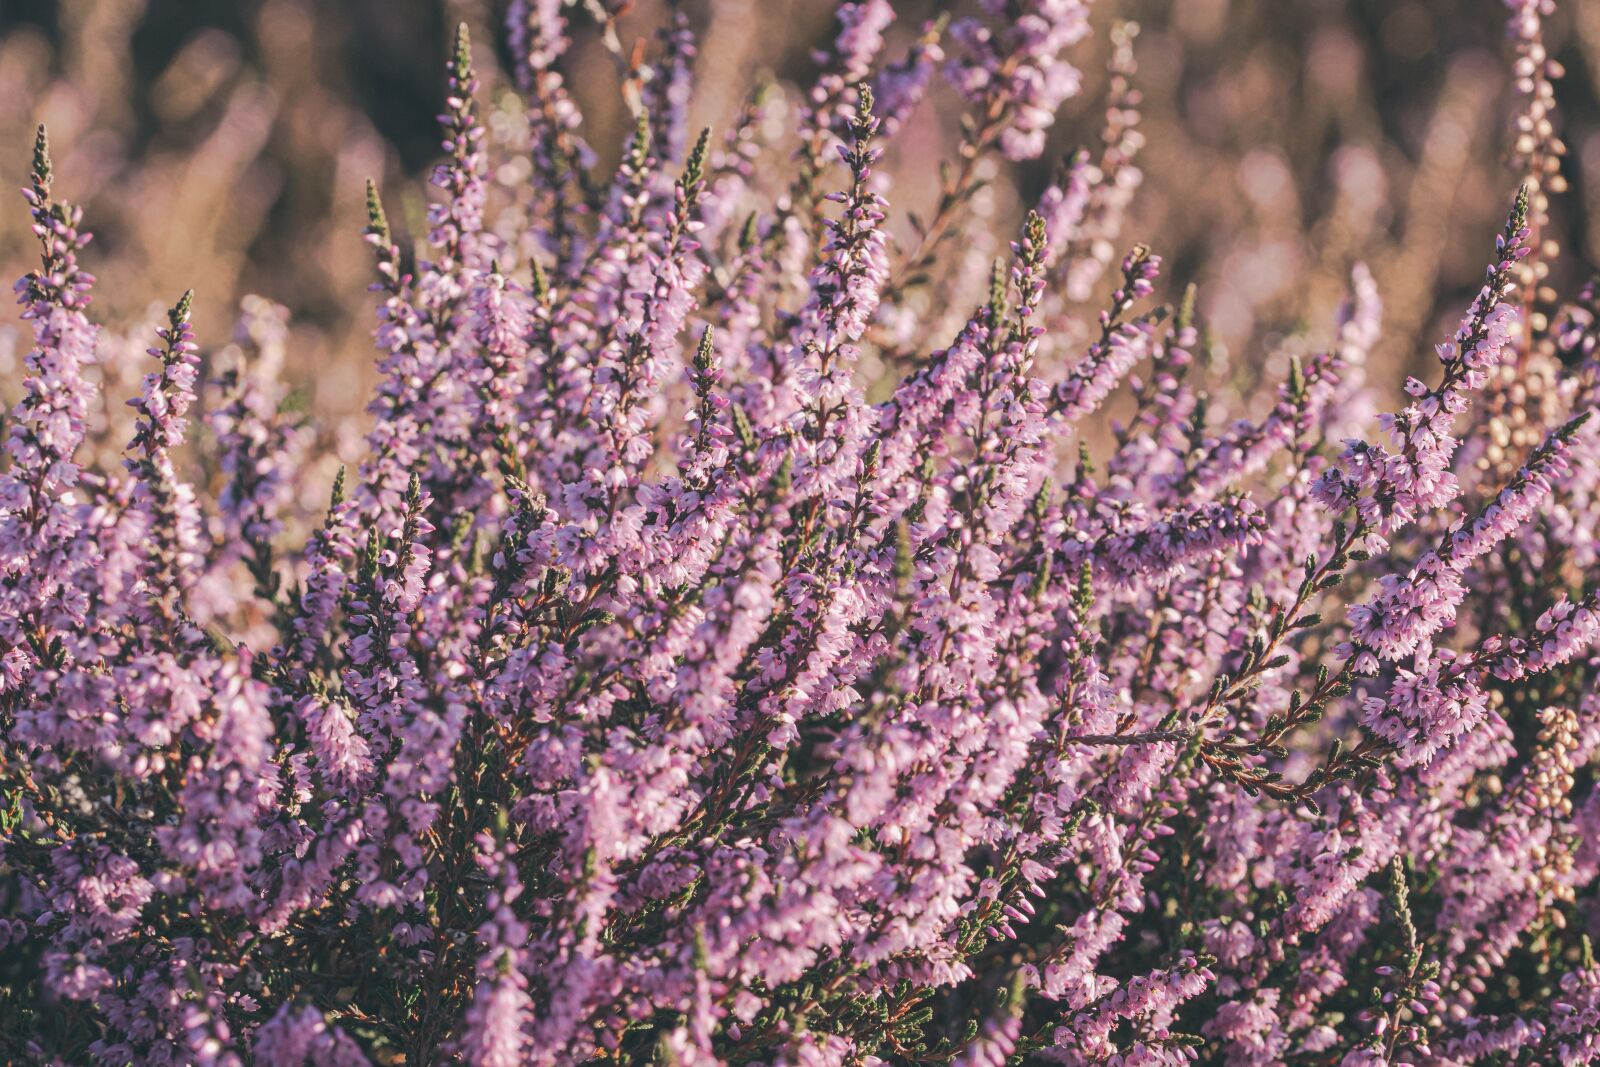 105mm F2.8 sample photo. Heather, flowers, plant photography